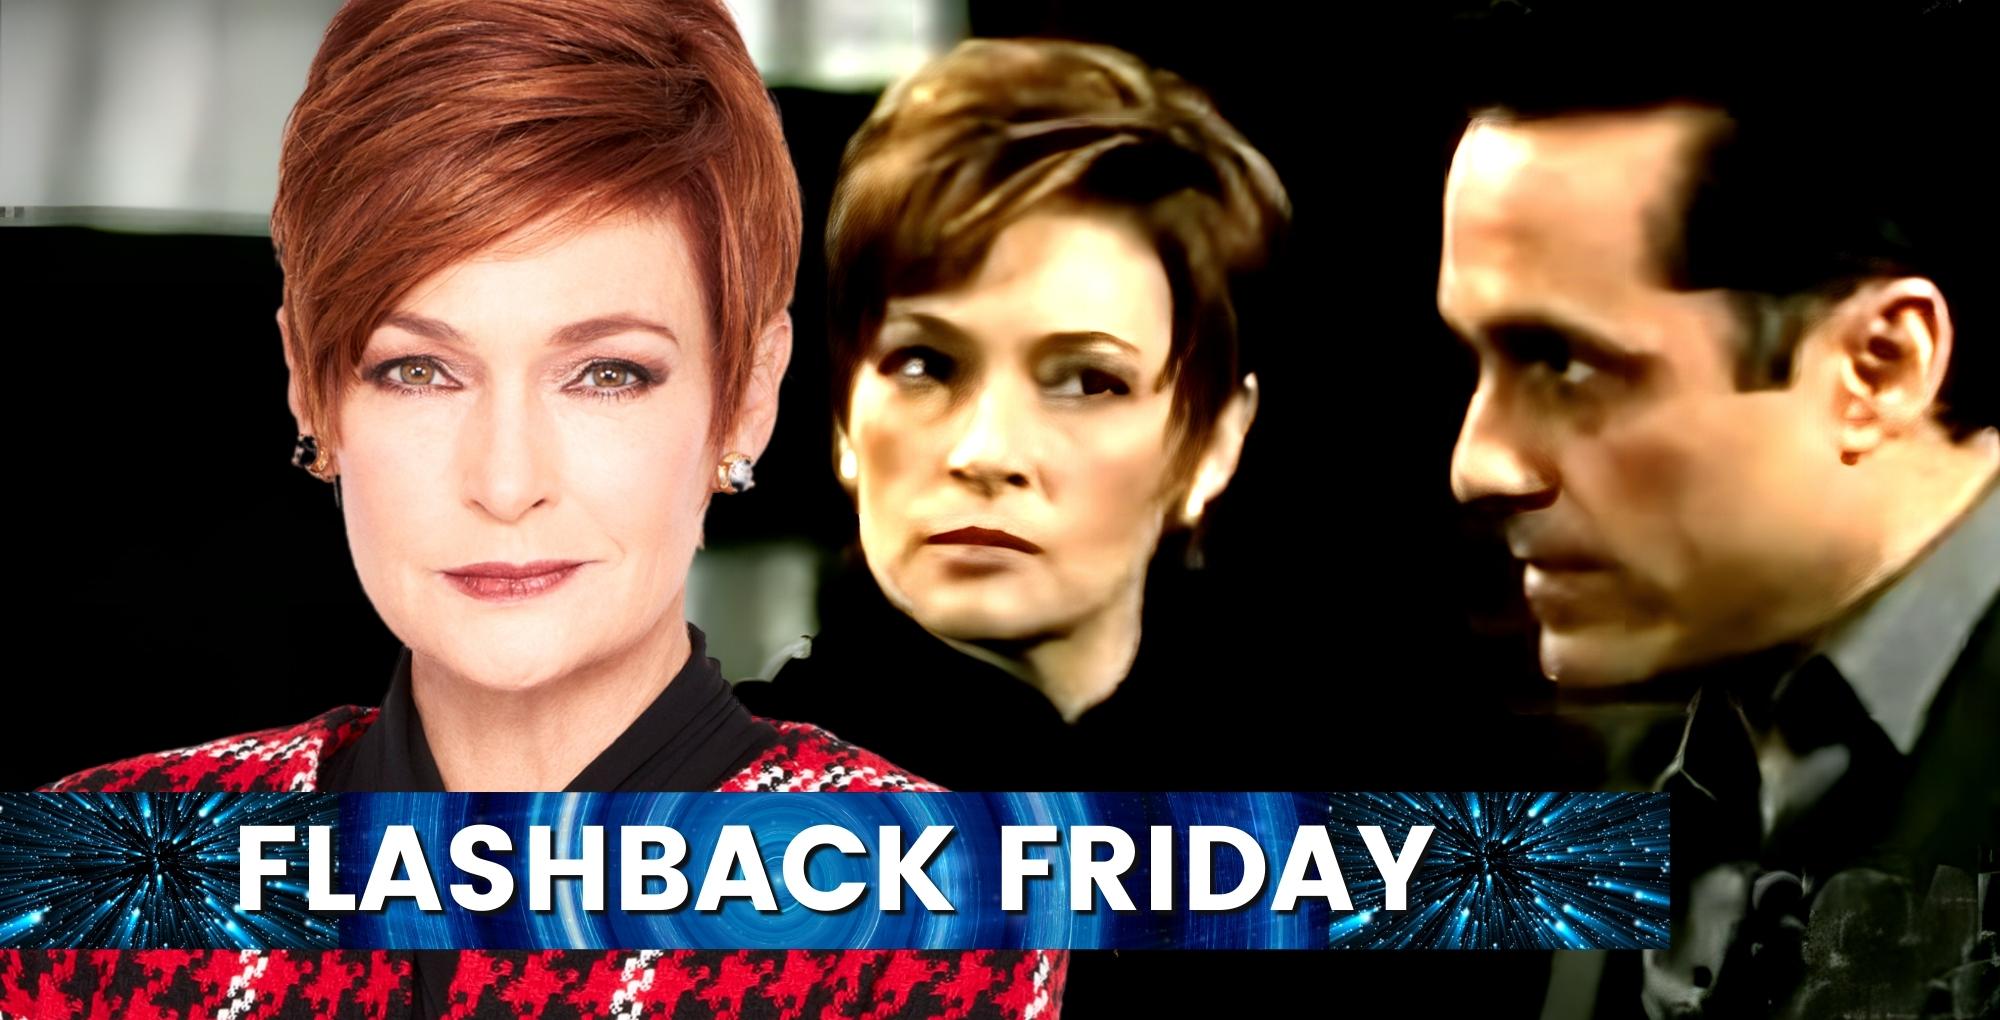 carolyn hennesy remembers general hospital moment with maurice benard as they portrayed diane and sonny.